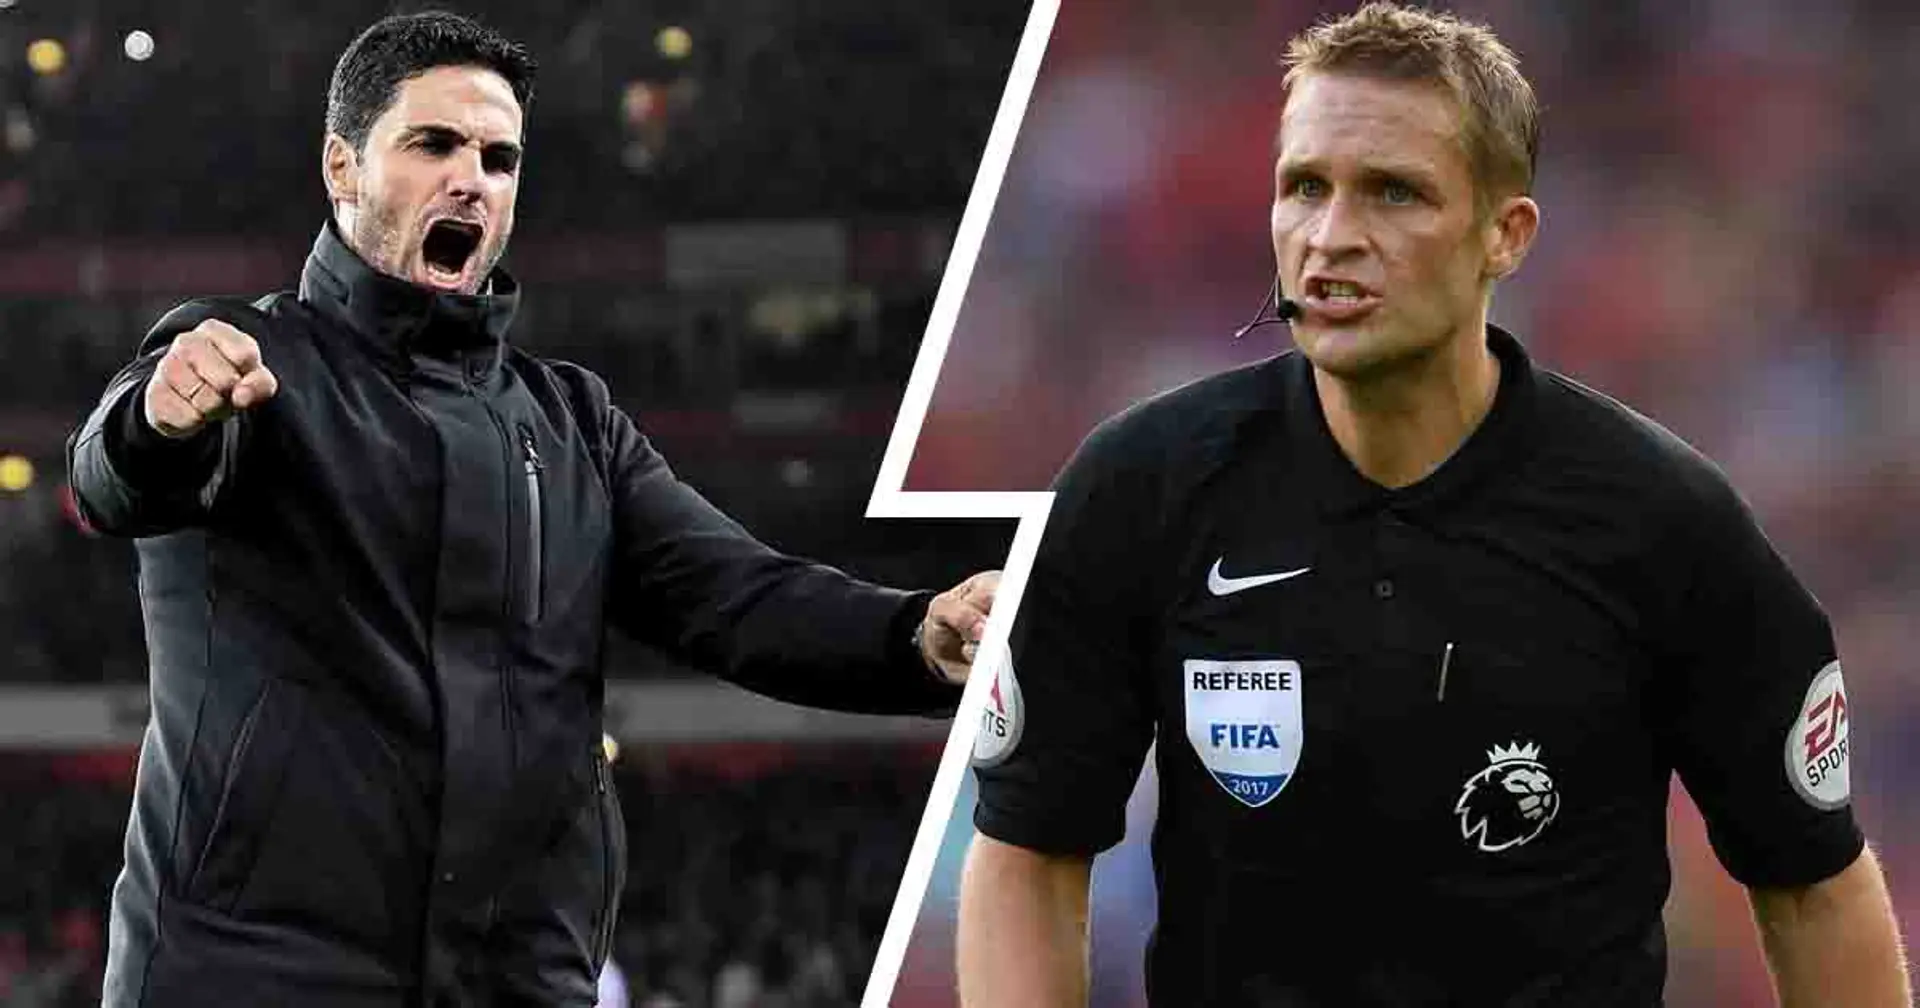 Referee named for West Ham clash & 3 more under-radar stories at Arsenal